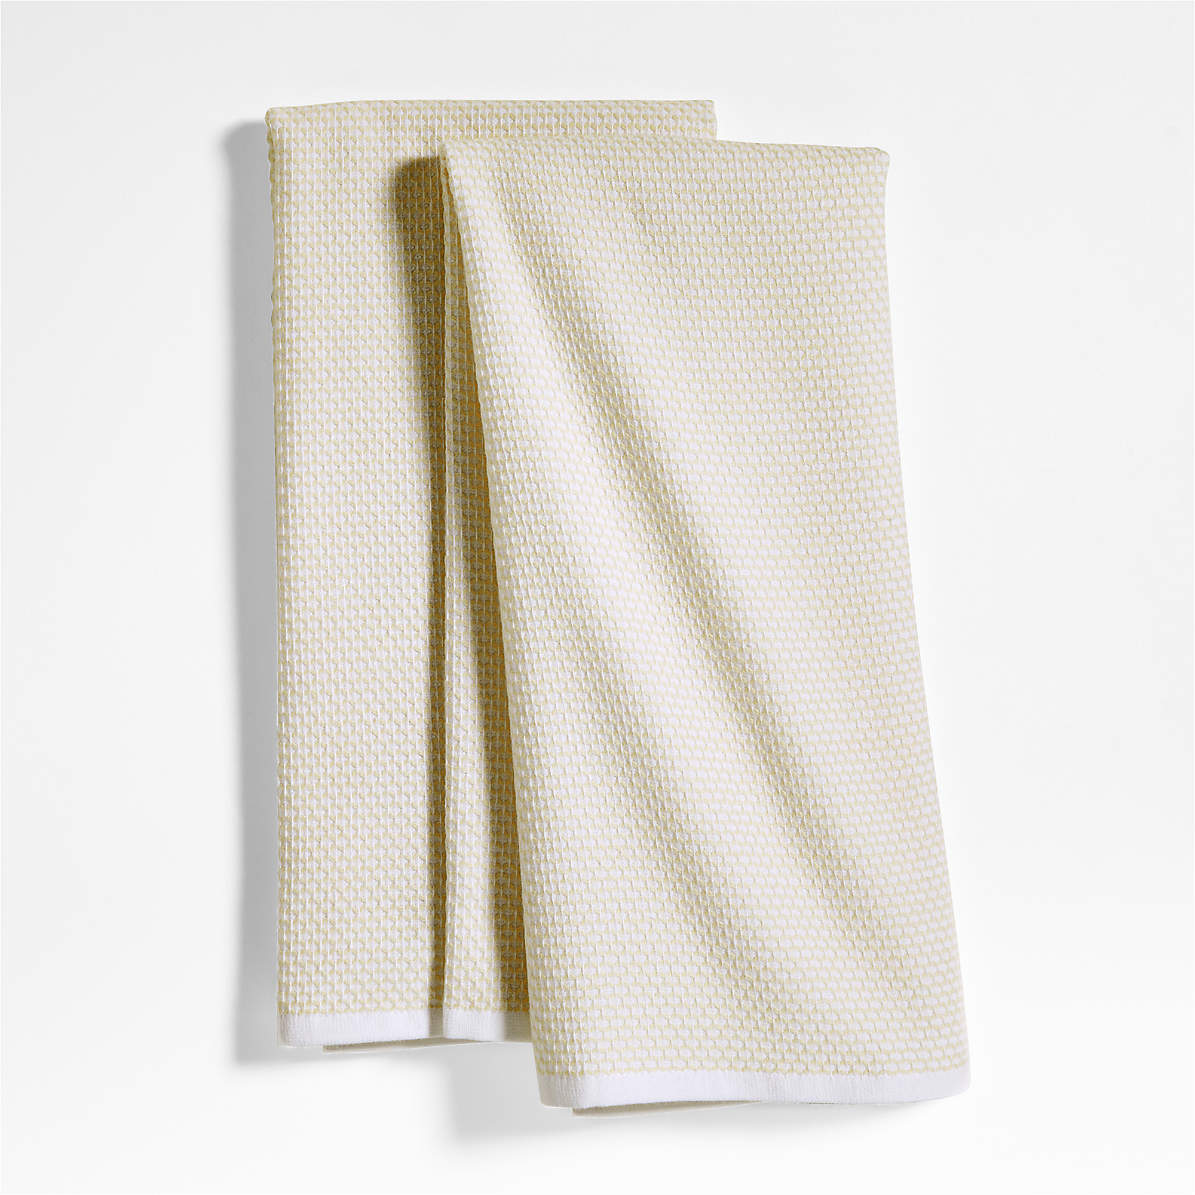 Food Network Kitchen Towel Set Featuring 2 Quick Dry Kitchen Towels in Tans  and Light Browns